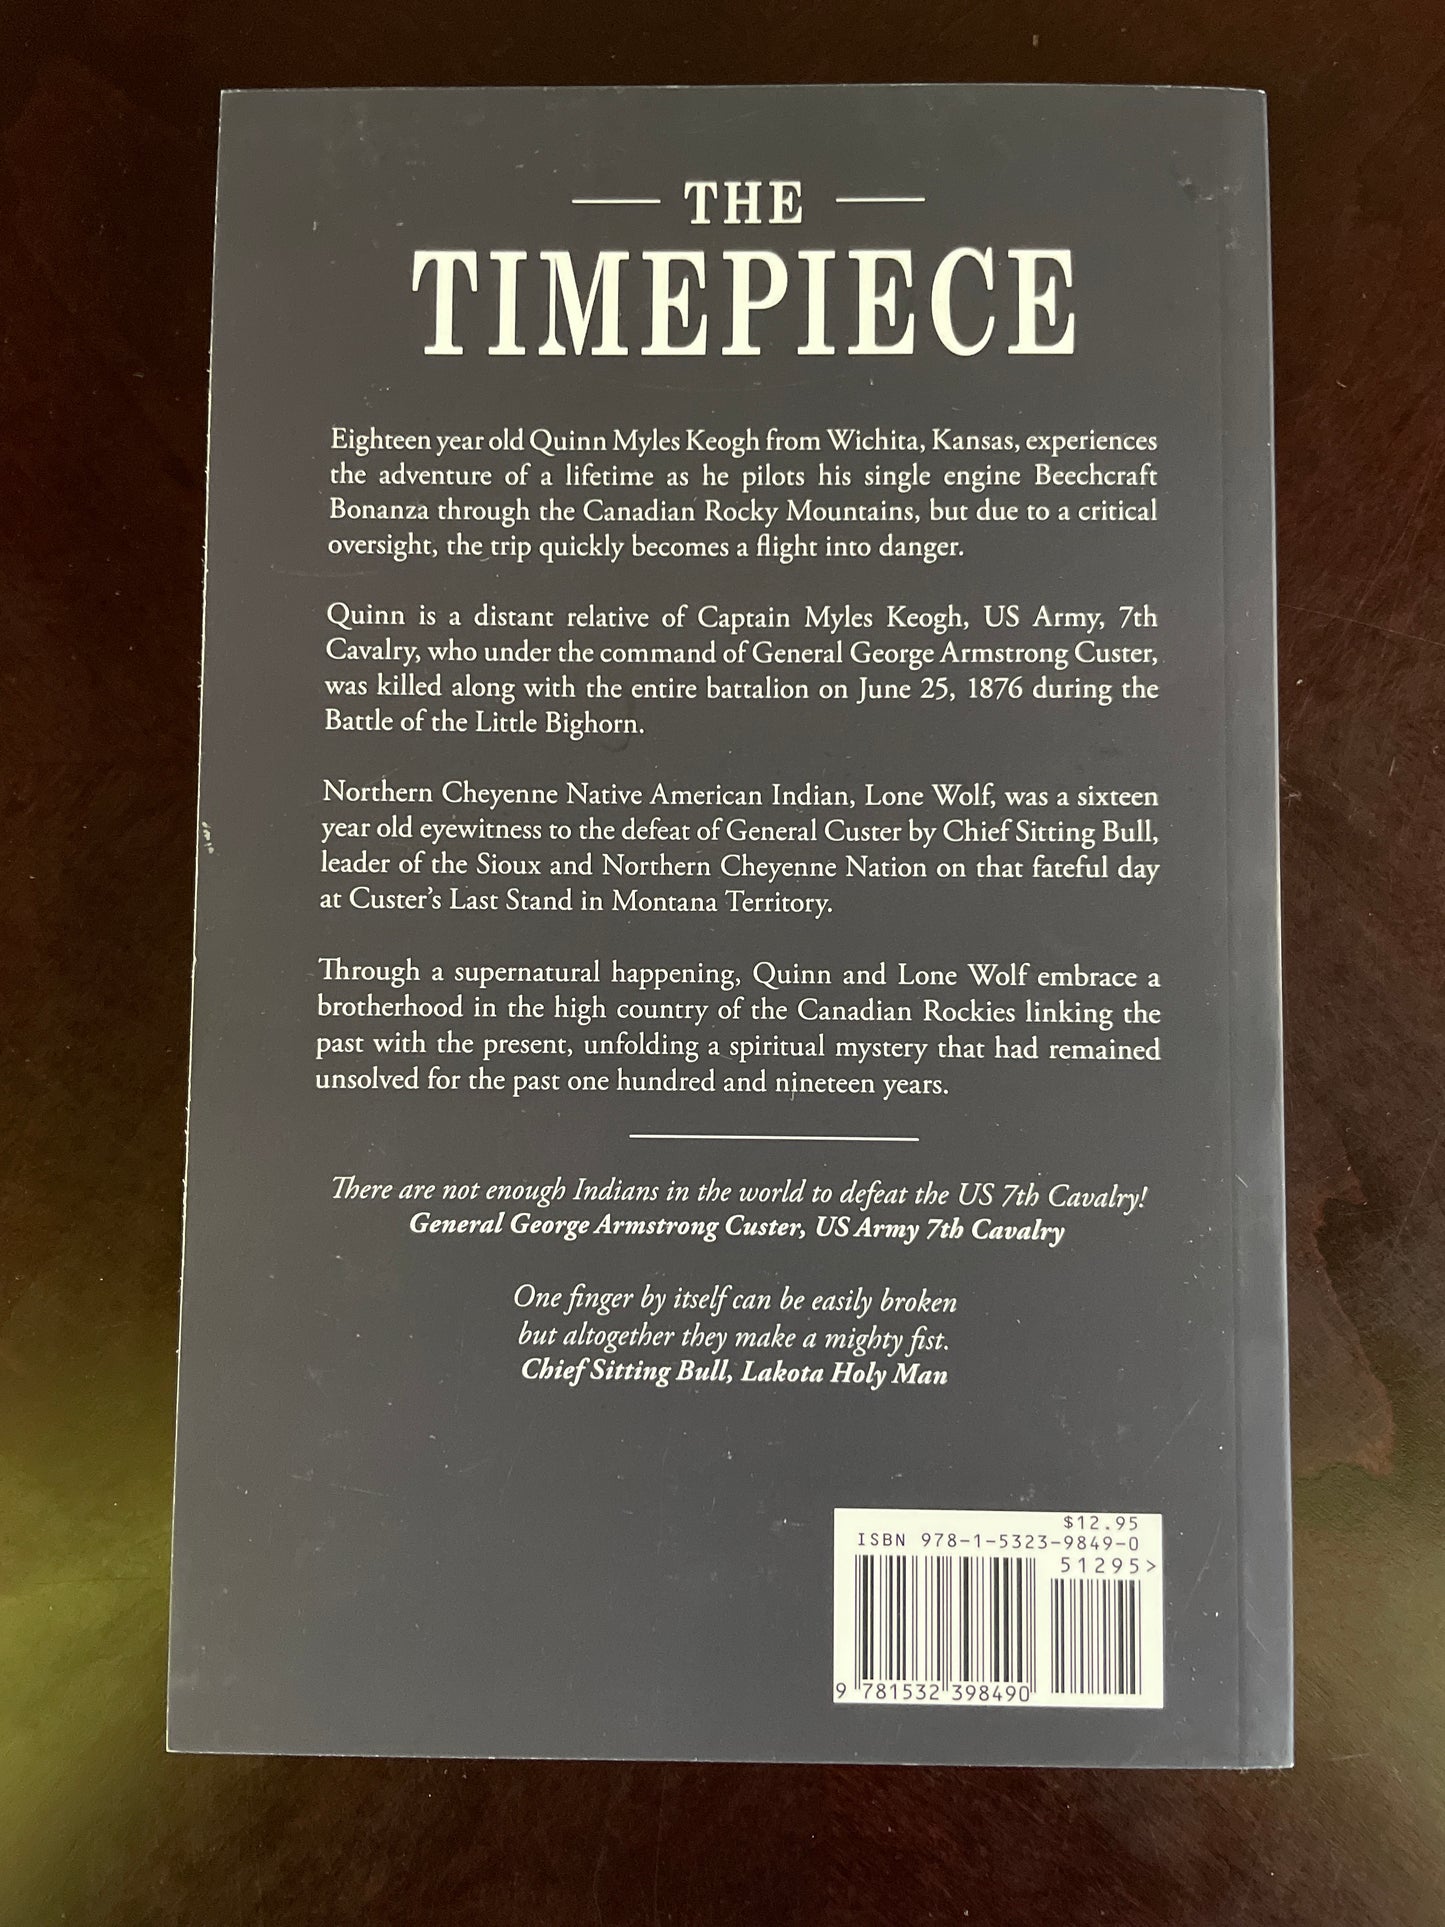 The Timepiece (Signed) - Dodds, Drew